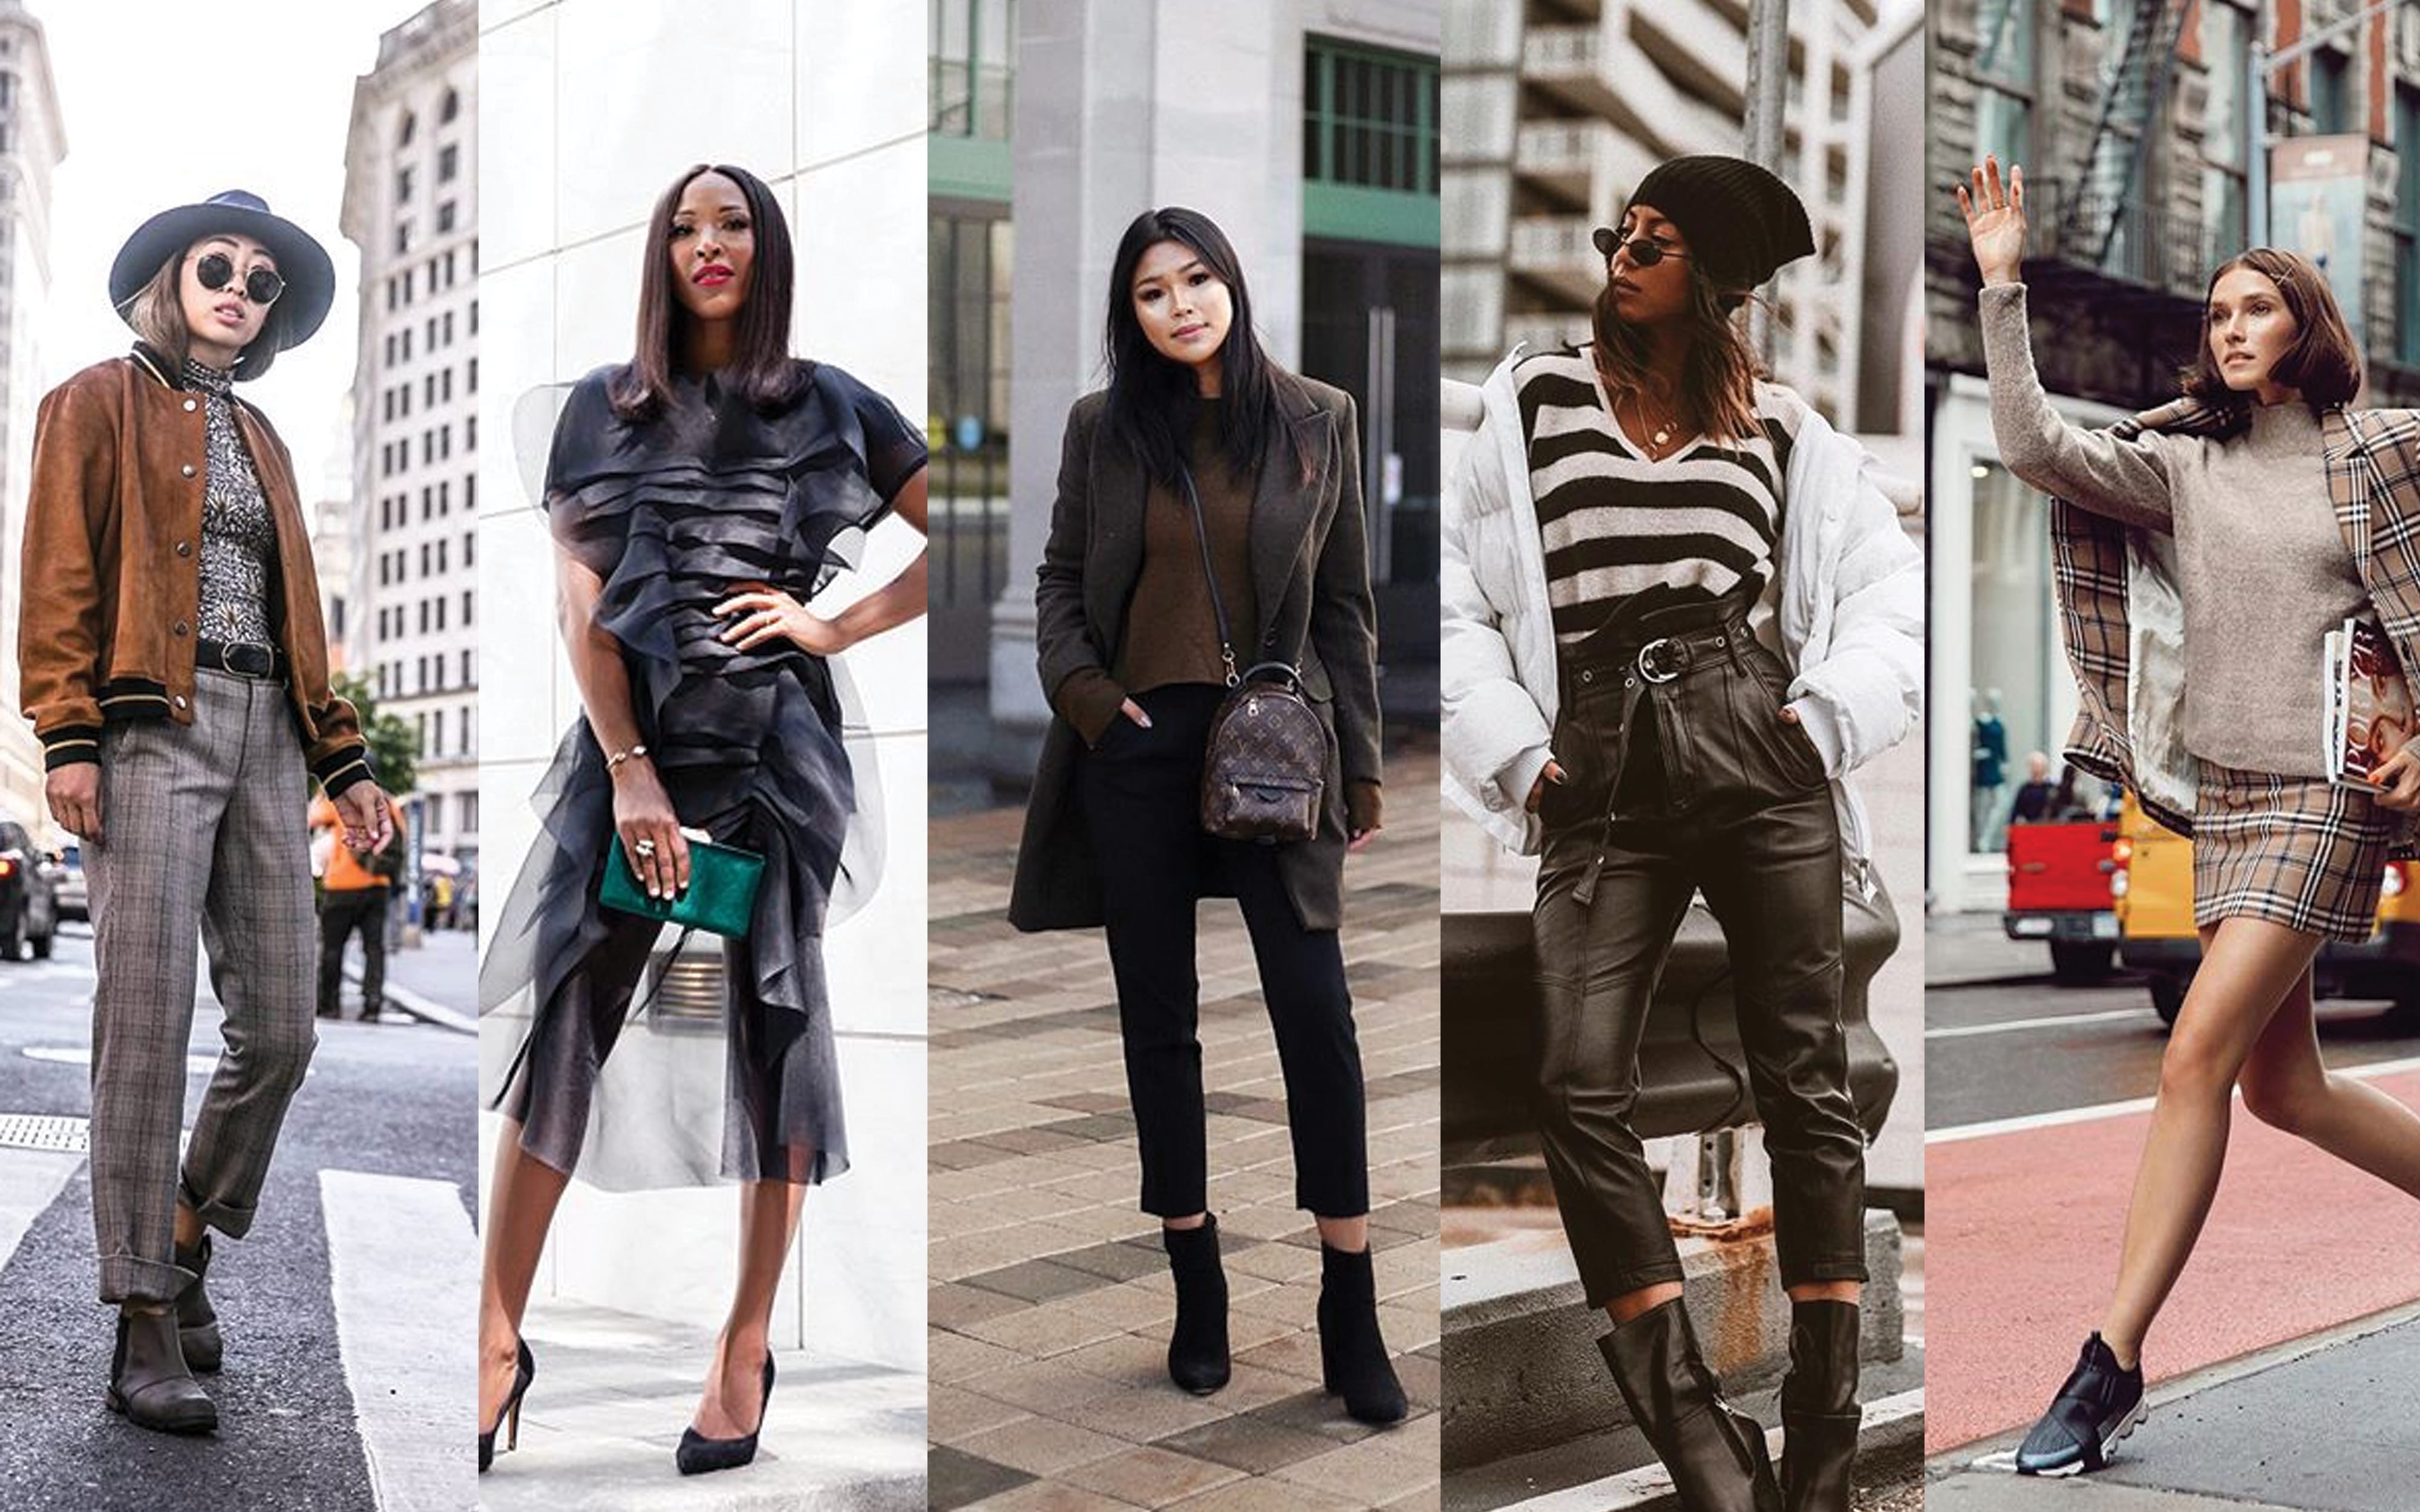 18 Canadian Influencers to Get on Your Feed (If They're Not Already